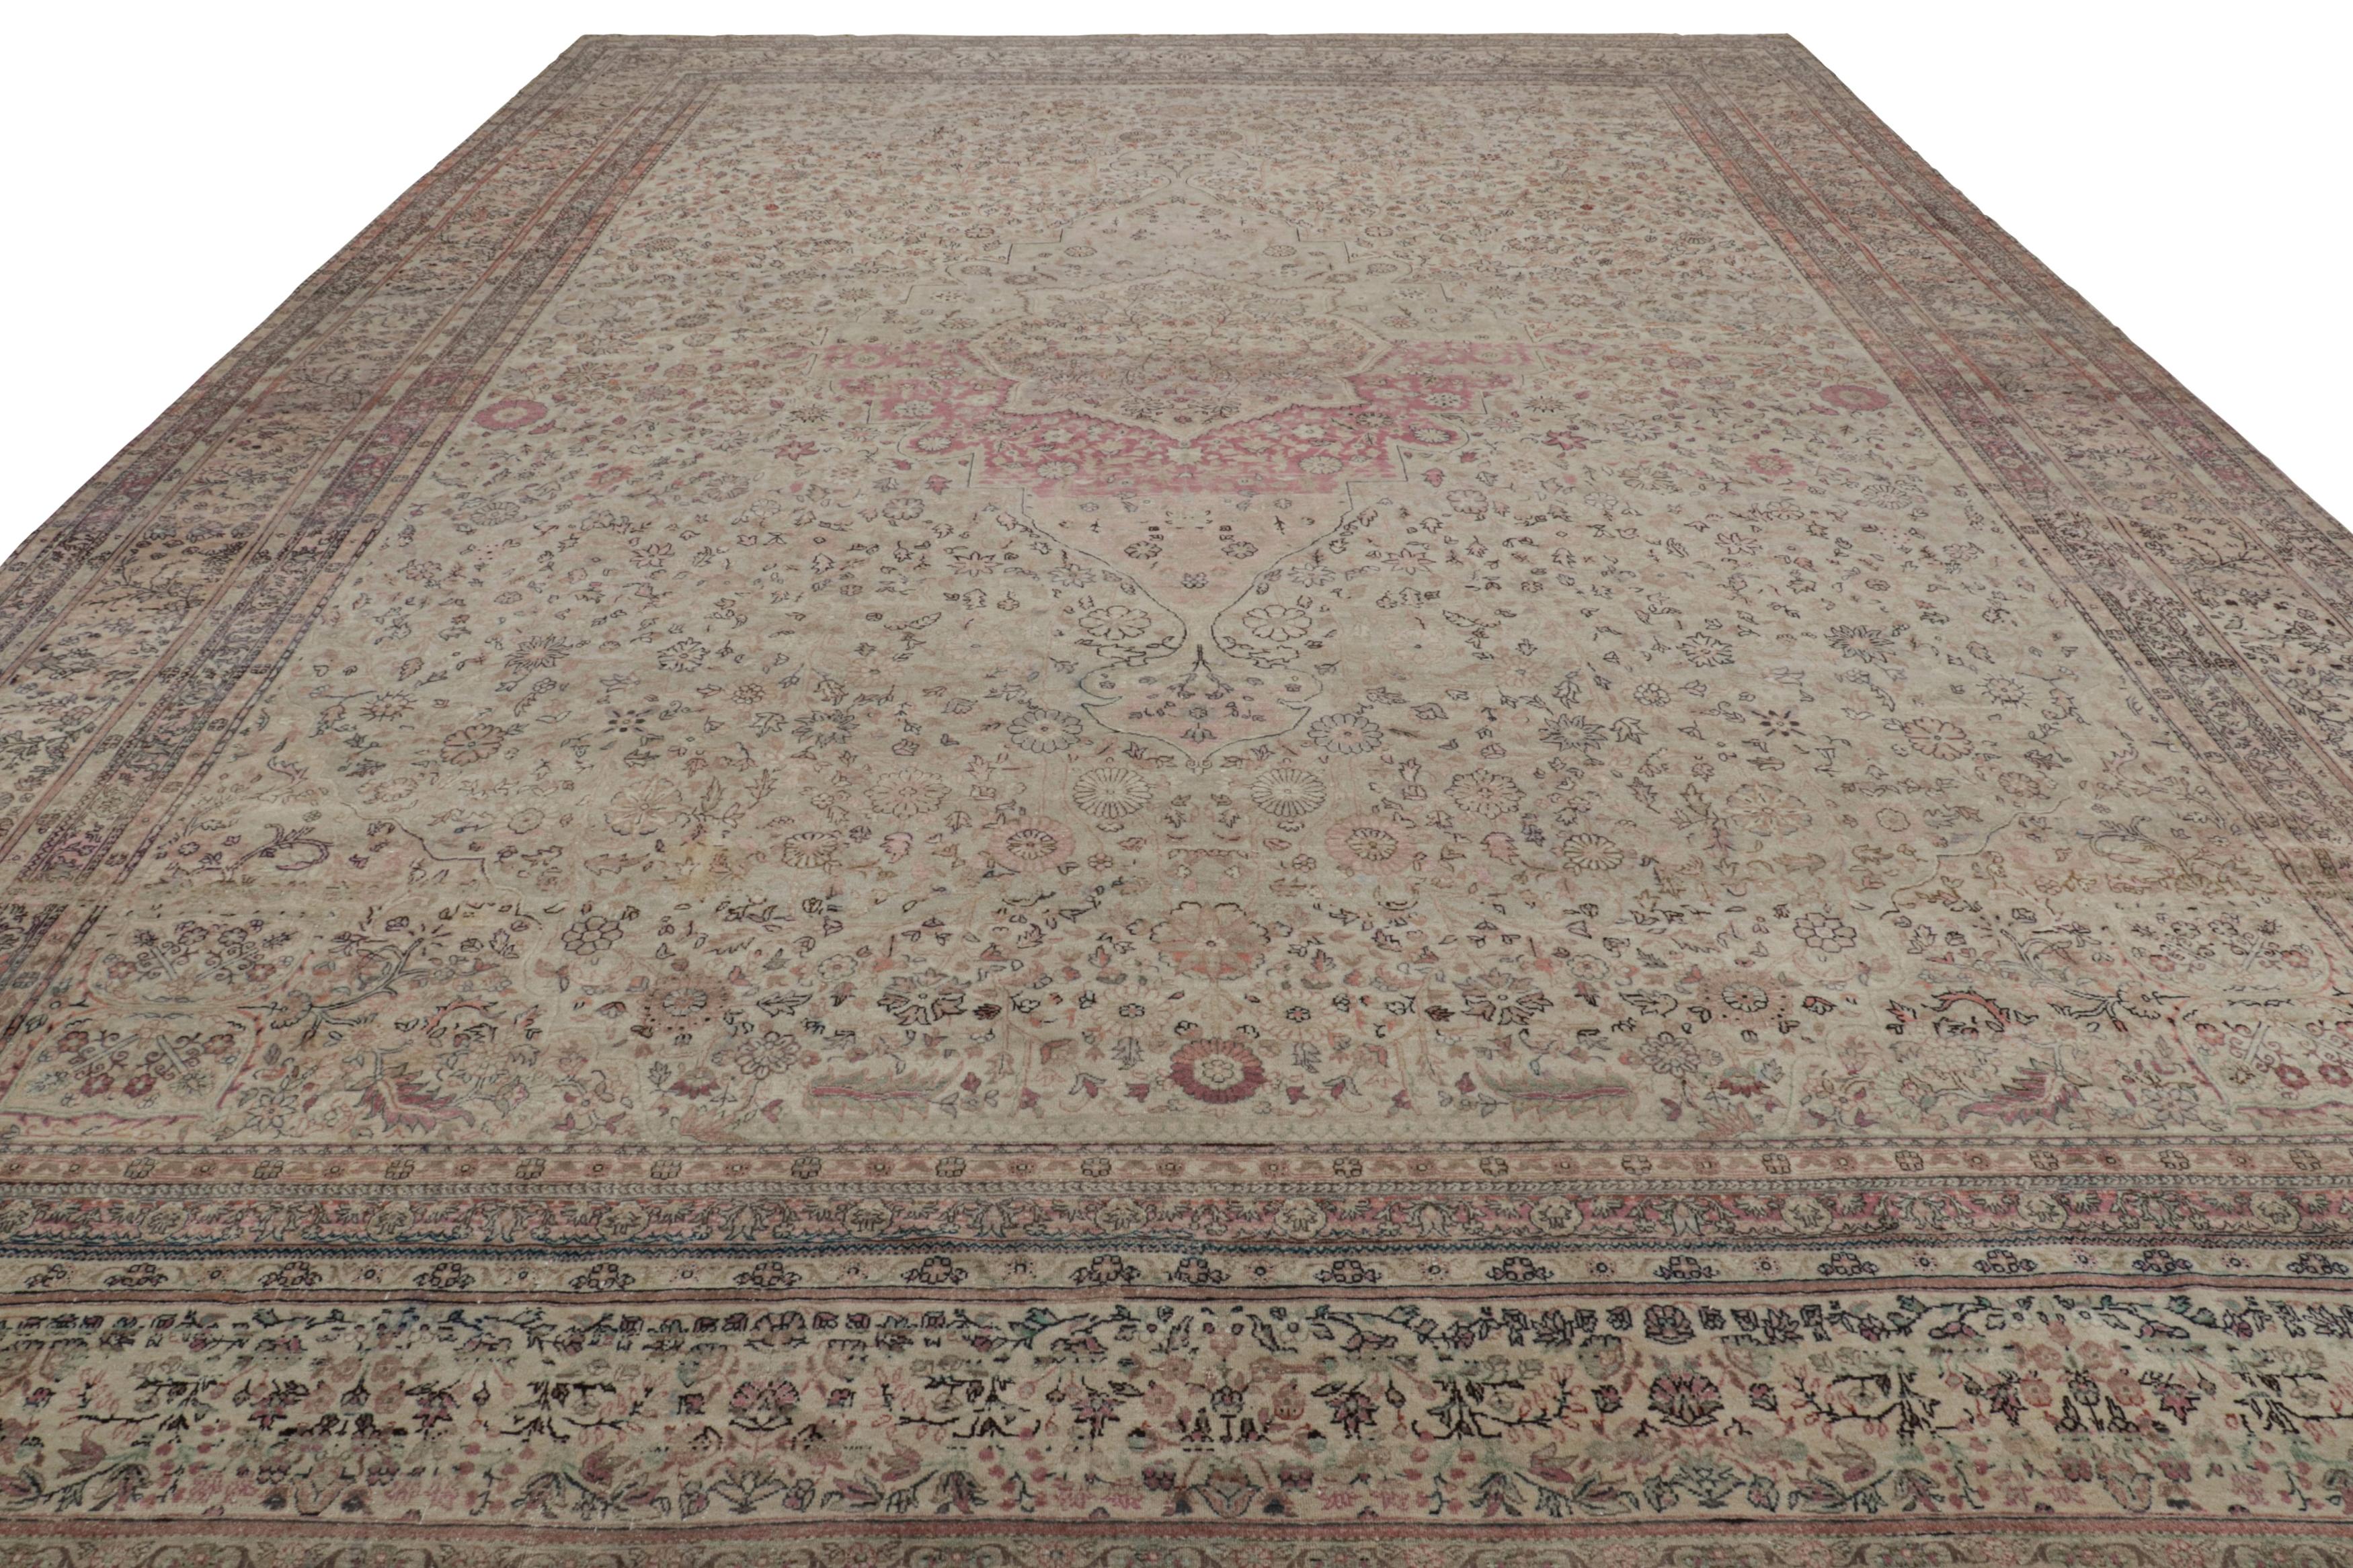 Oversized Antique Sivas Rug in Beige and Red Floral Patterns, from Rug & Kilim In Good Condition For Sale In Long Island City, NY